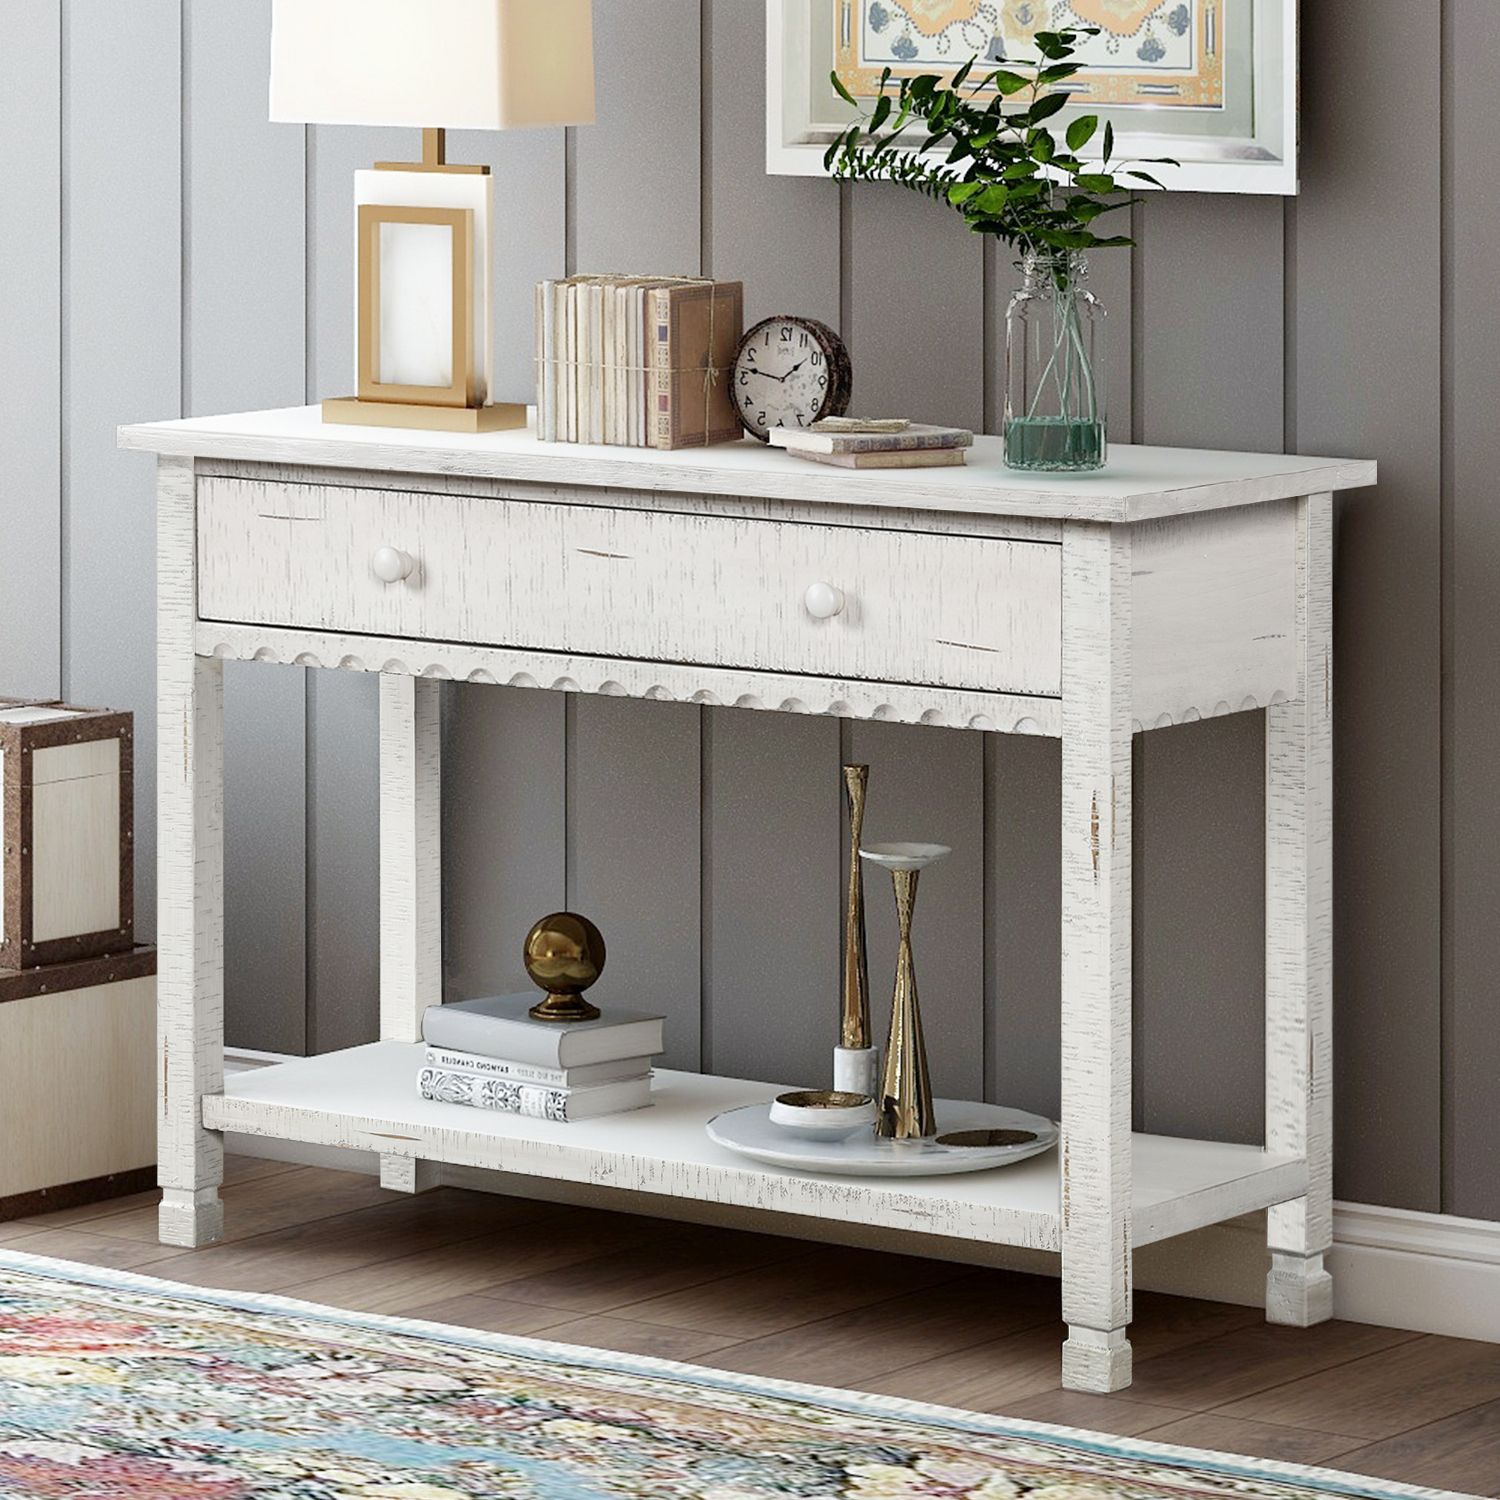 Popular Wood Sofa Table With Storage, Wavy Edge Sofa Table With Throughout Oceanside White Washed Console Tables (View 7 of 10)